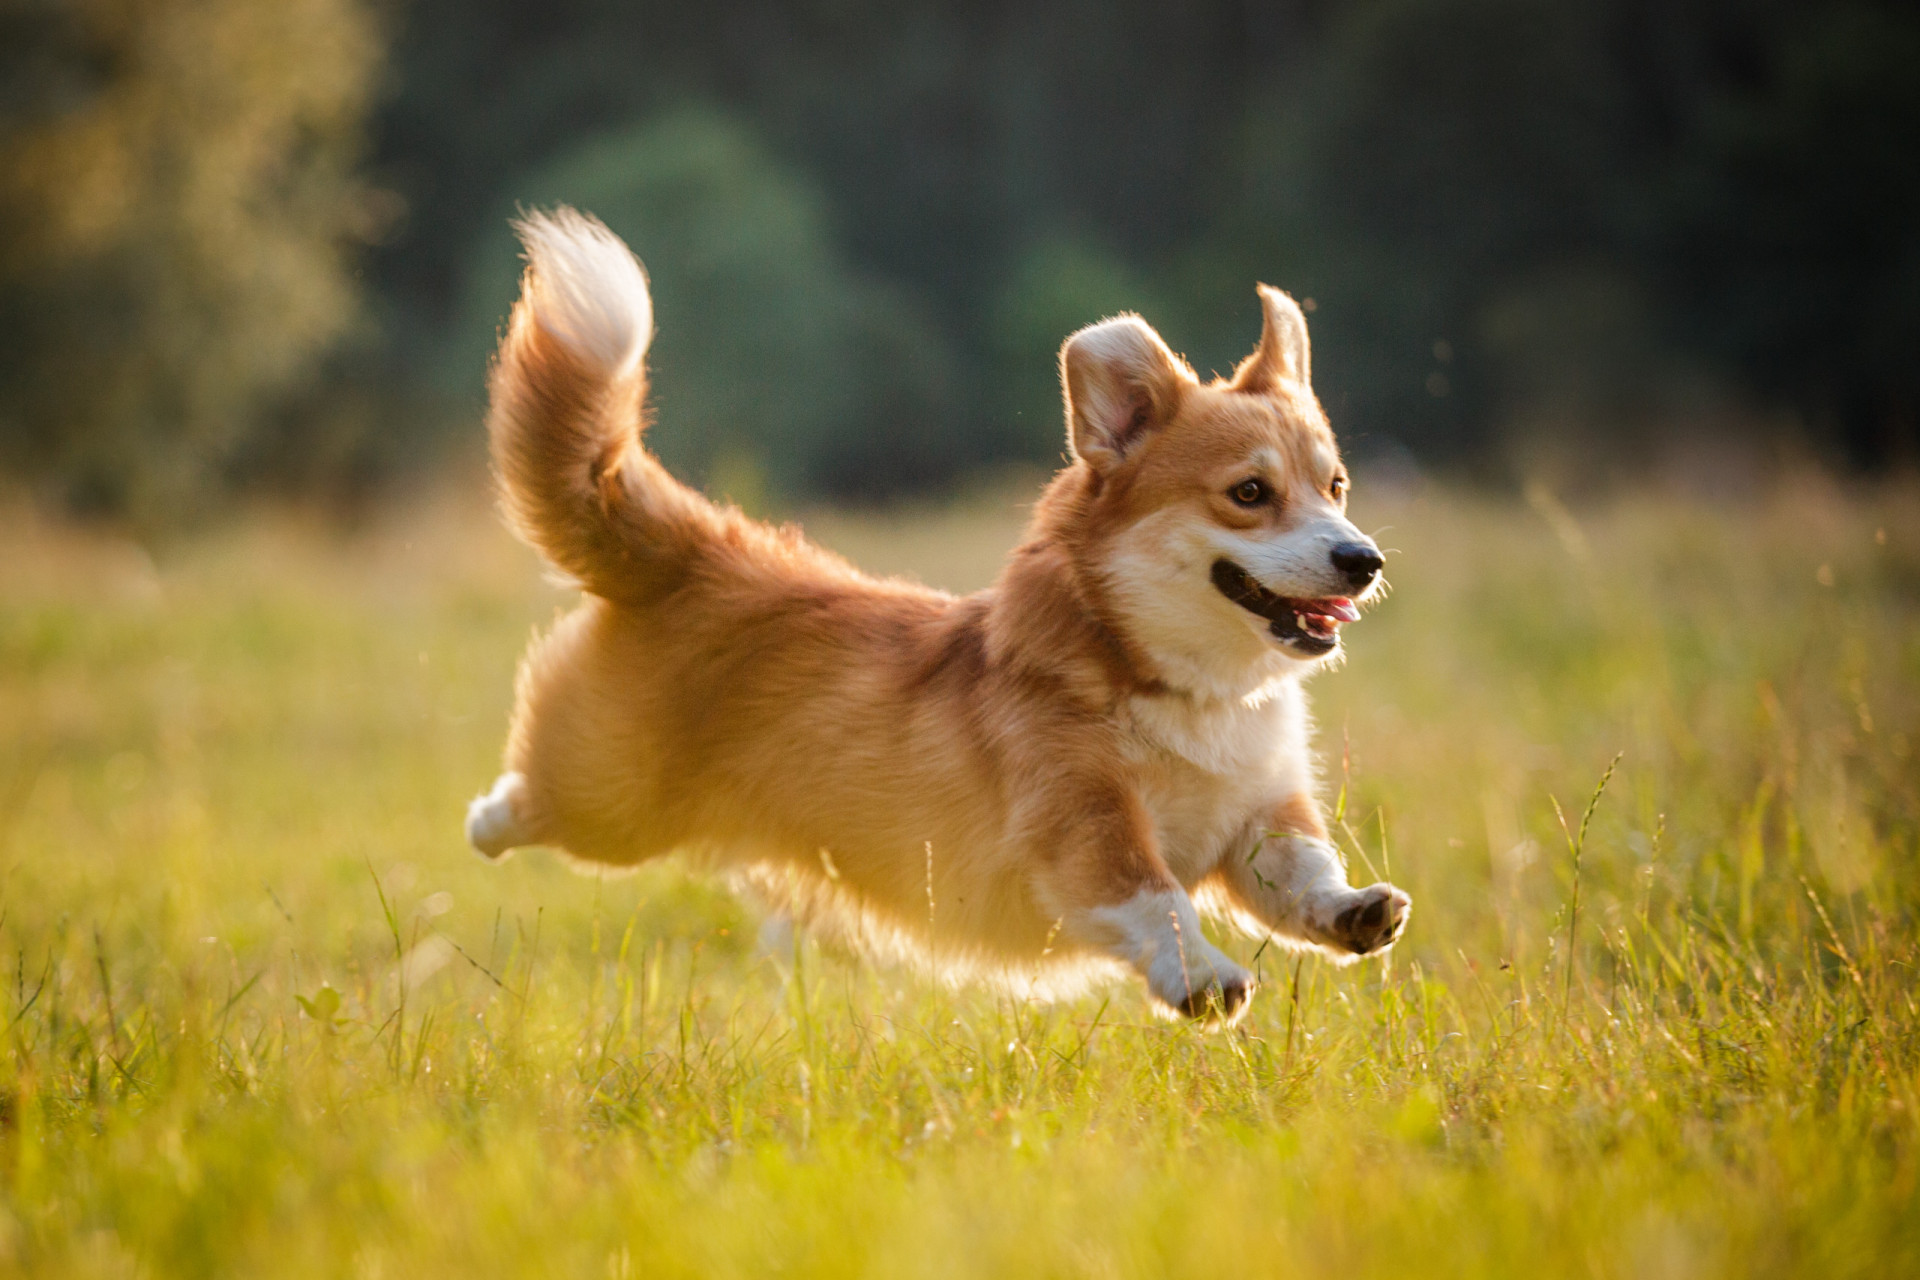 <p>Corgis are sturdy dogs who are both obedient and easy to train. Their lifespan is from 12 to 15 years. </p><p>You may also like:<a href="https://www.starsinsider.com/n/426966?utm_source=msn.com&utm_medium=display&utm_campaign=referral_description&utm_content=605595en-us"> The surprising perks of self-isolation</a></p>